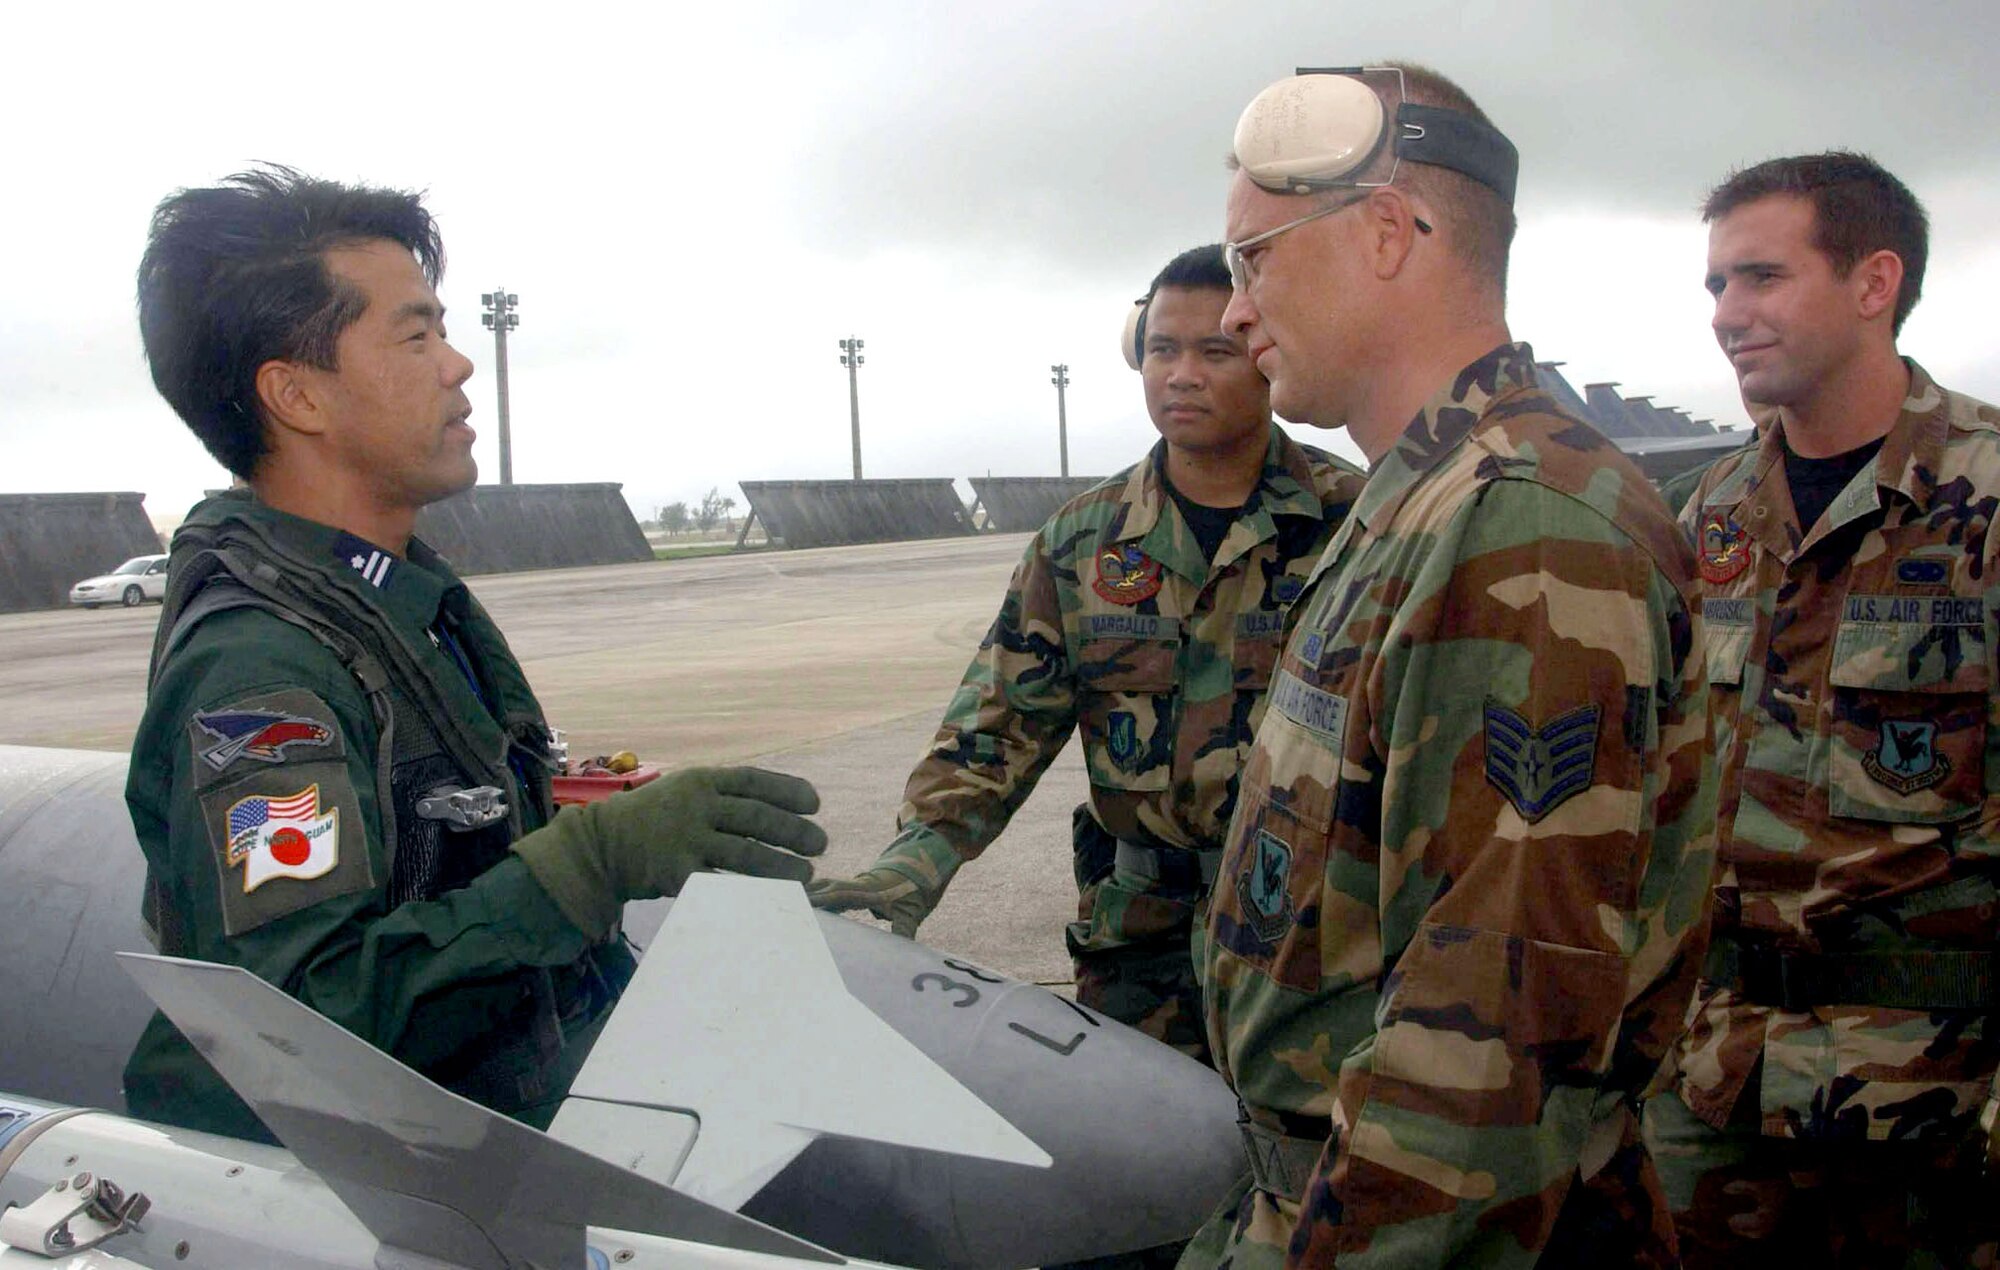 ANDERSEN AIR FORCE BASE, Guam -- Japanese Maj. Hideaki Yoshizawa explains the features of his aircraft to Staff Sgts. Martin Waack (foreground), Lucilio Margallo (left) and Senior Airman Joseph Dombroski during exercise Cope North.  Waack, Margallo and Dombroski are crew chiefs from the 67th Aircraft Maintenance Unit at Kadena Air Base, Japan.  Hideaki is an F-4 fighter pilot from the 83rd Wing at Naha Air Base, Japan.  (U.S. Air Force photo by Master Sgt. Val Gempis)

